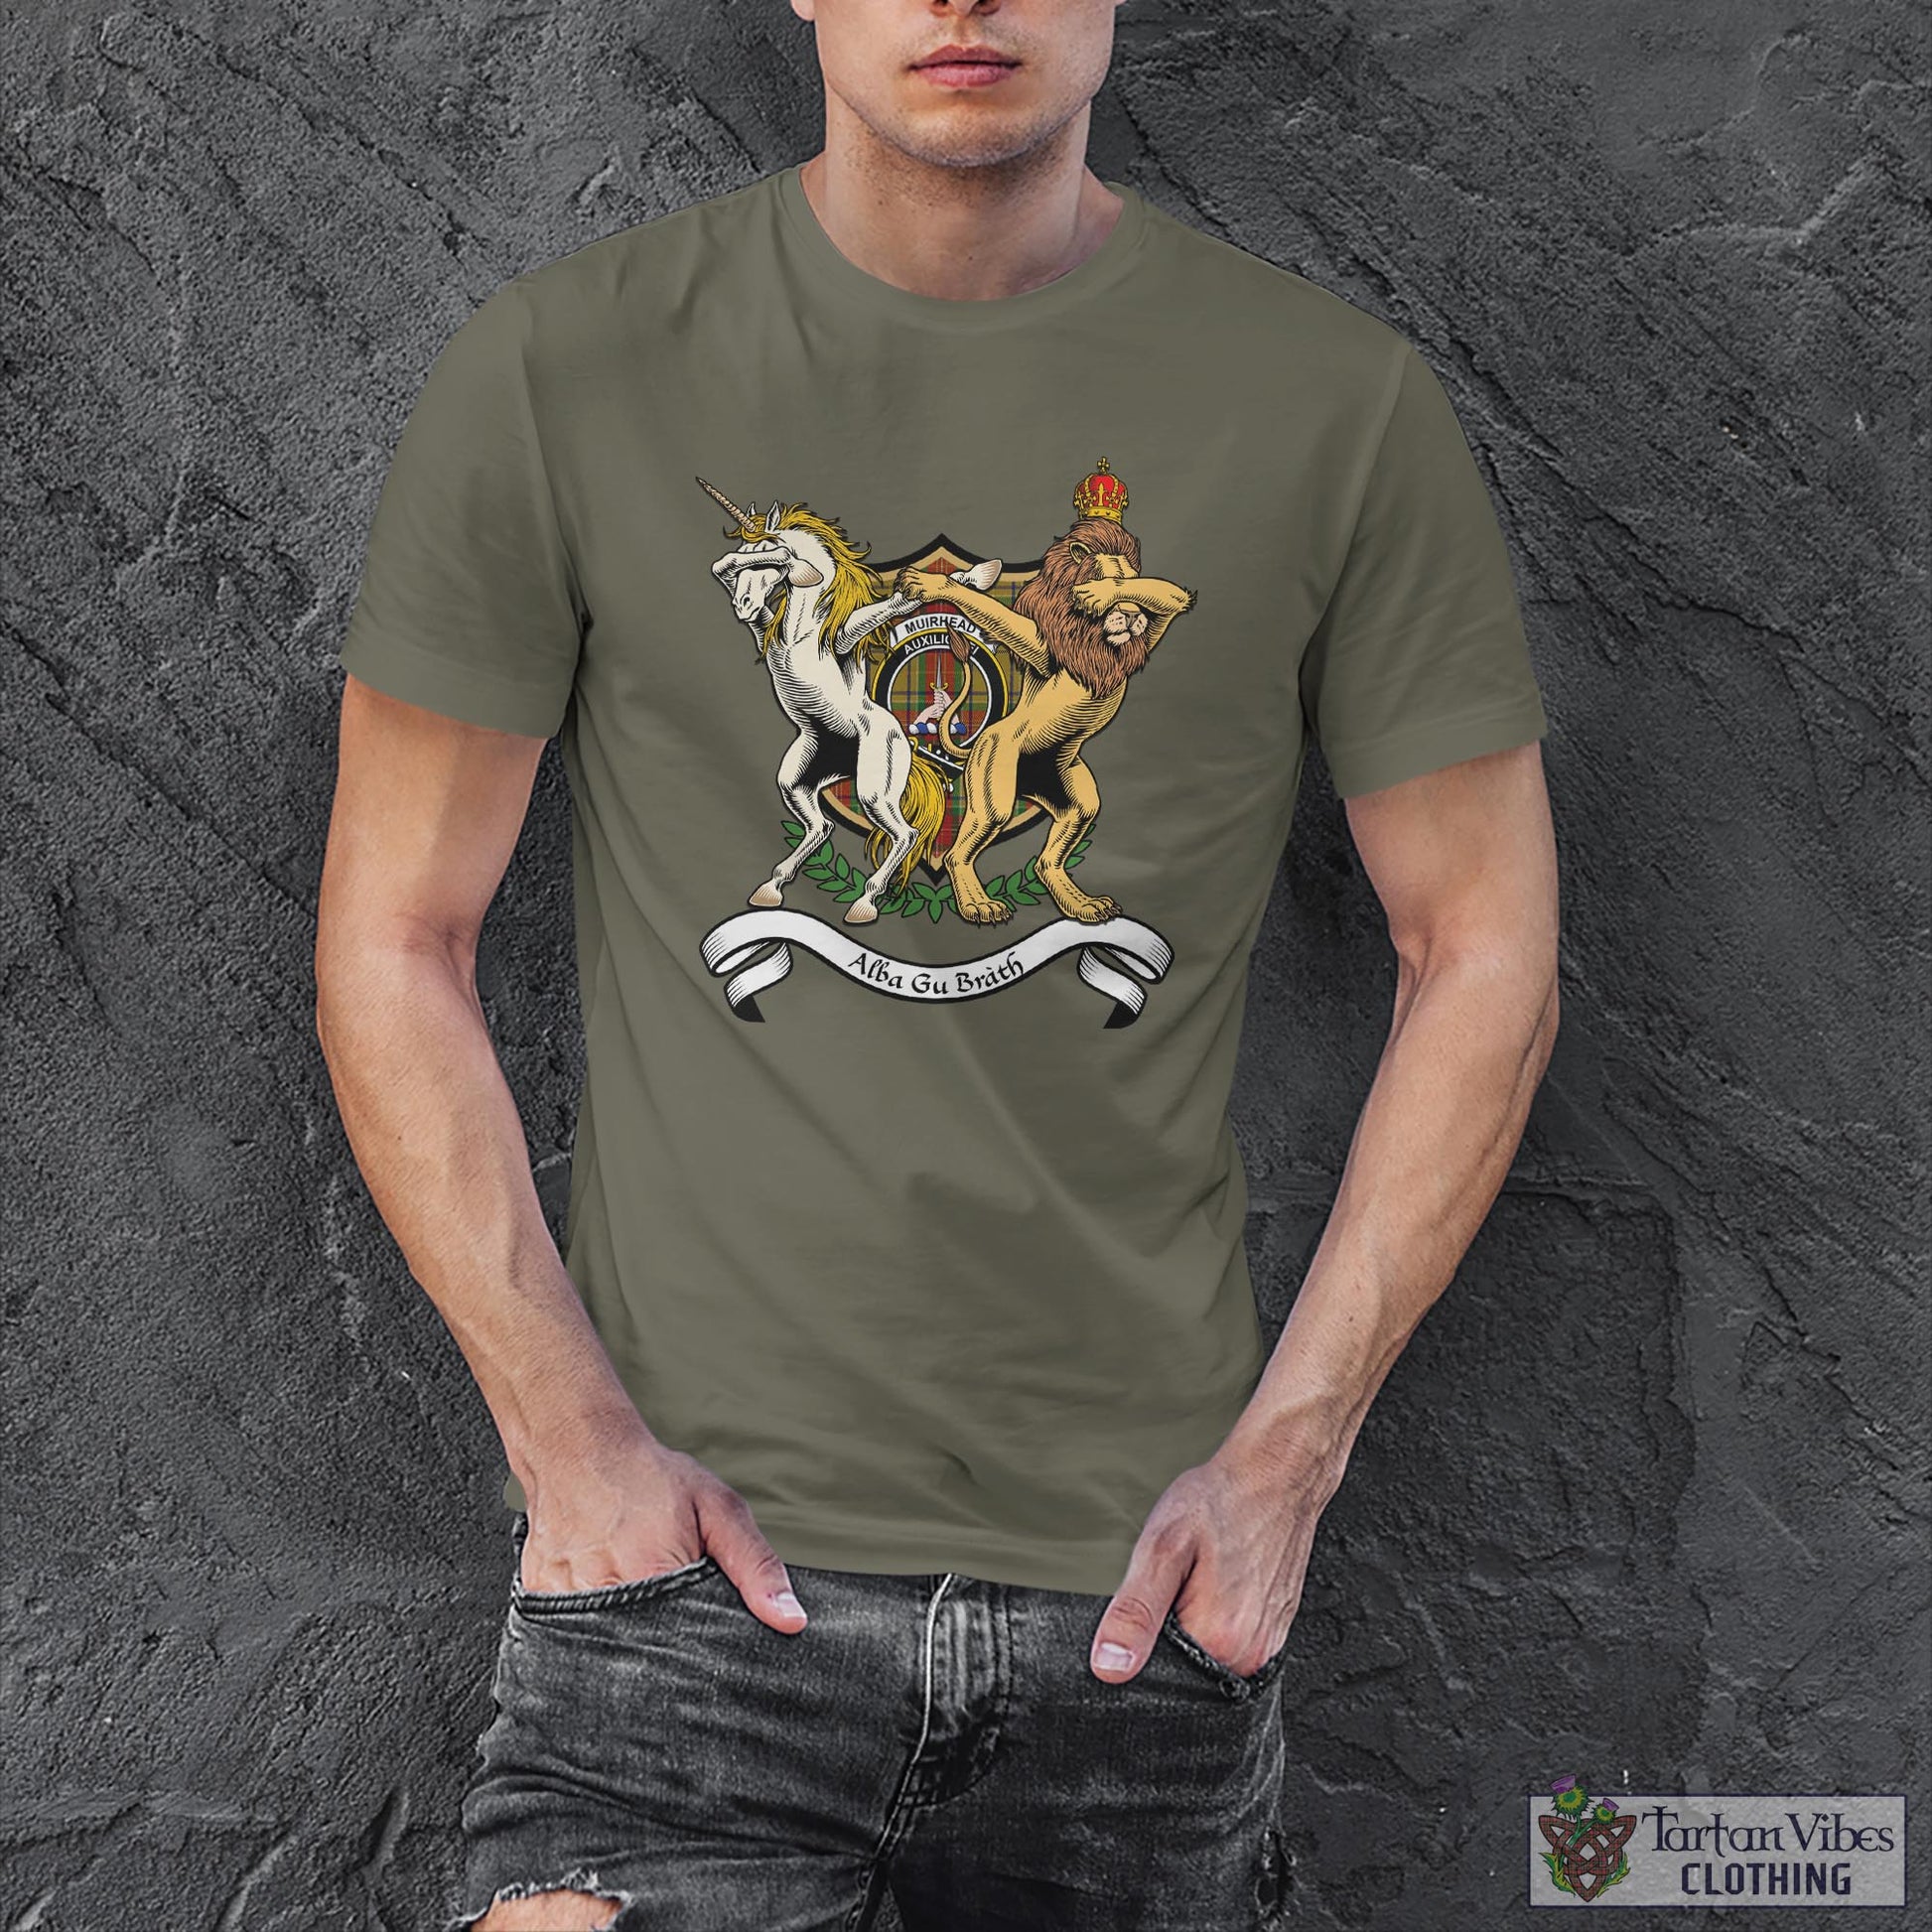 Tartan Vibes Clothing Muirhead Old Family Crest Cotton Men's T-Shirt with Scotland Royal Coat Of Arm Funny Style